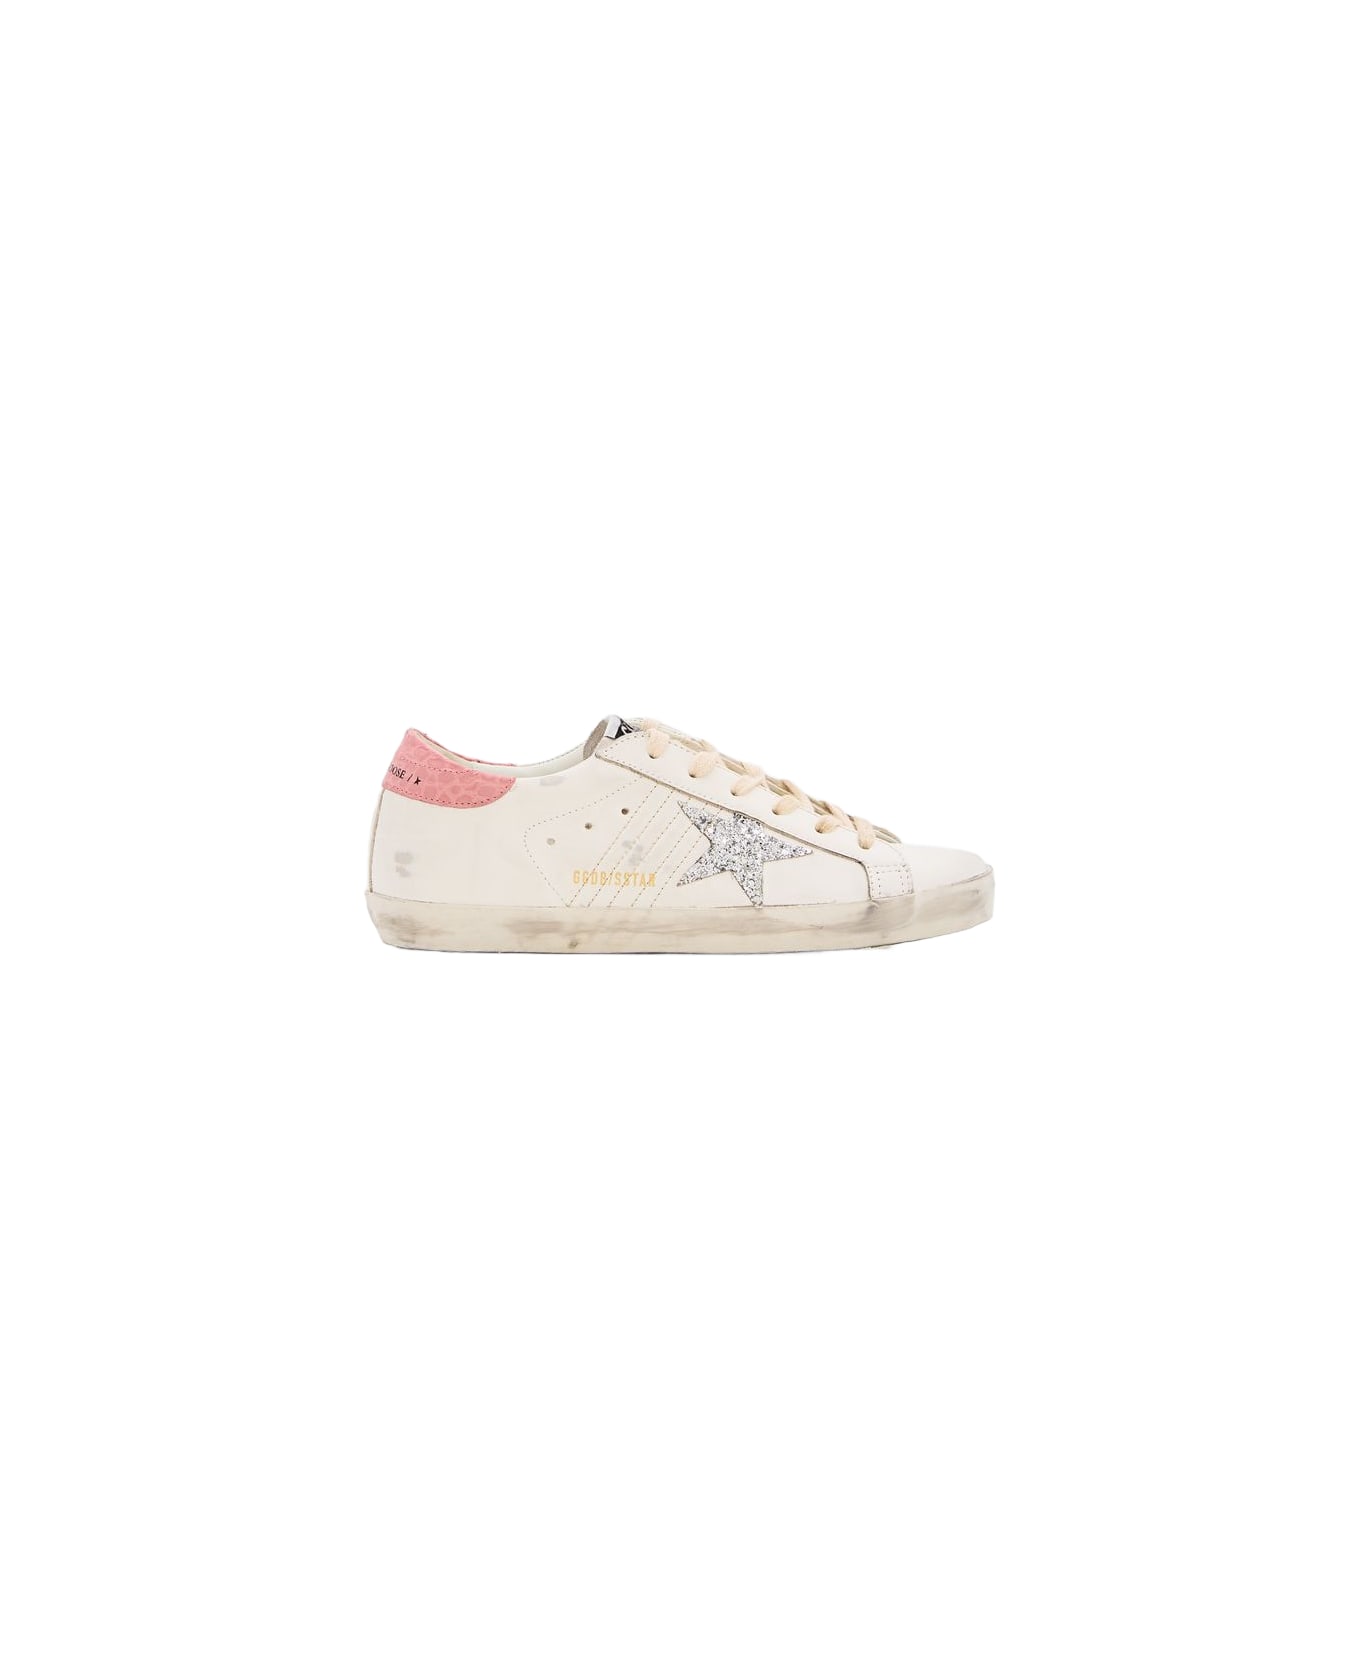 Golden Goose Super Star Leather And Glitter Sneakers - White スニーカー